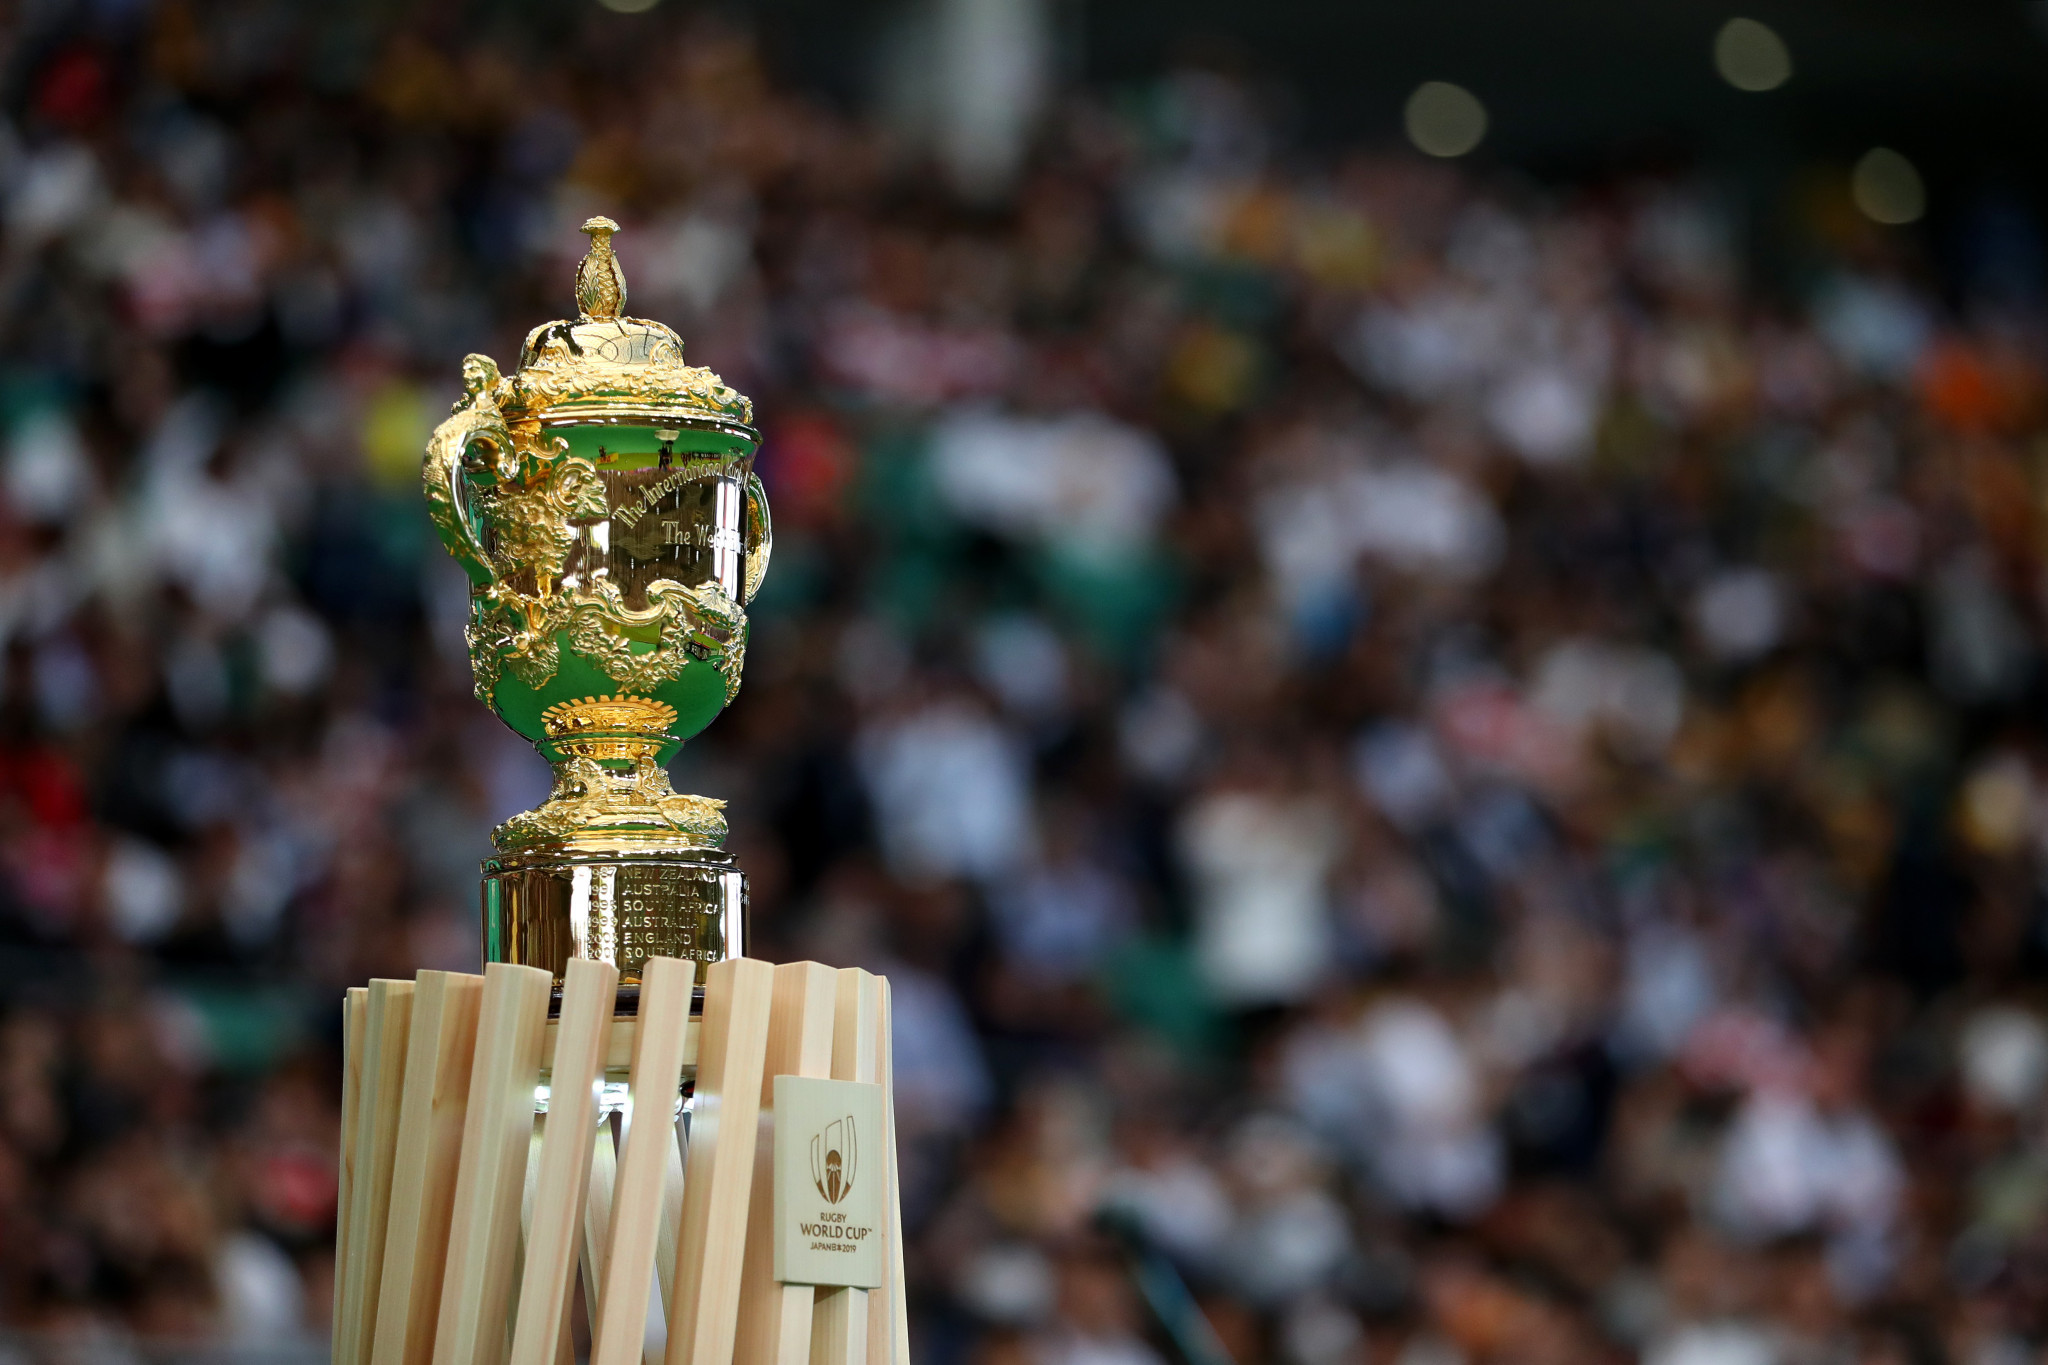 South Africa will be aiming to lift the Rugby World Cup trophy for the third time, while England are seeking their second title ©Getty Images